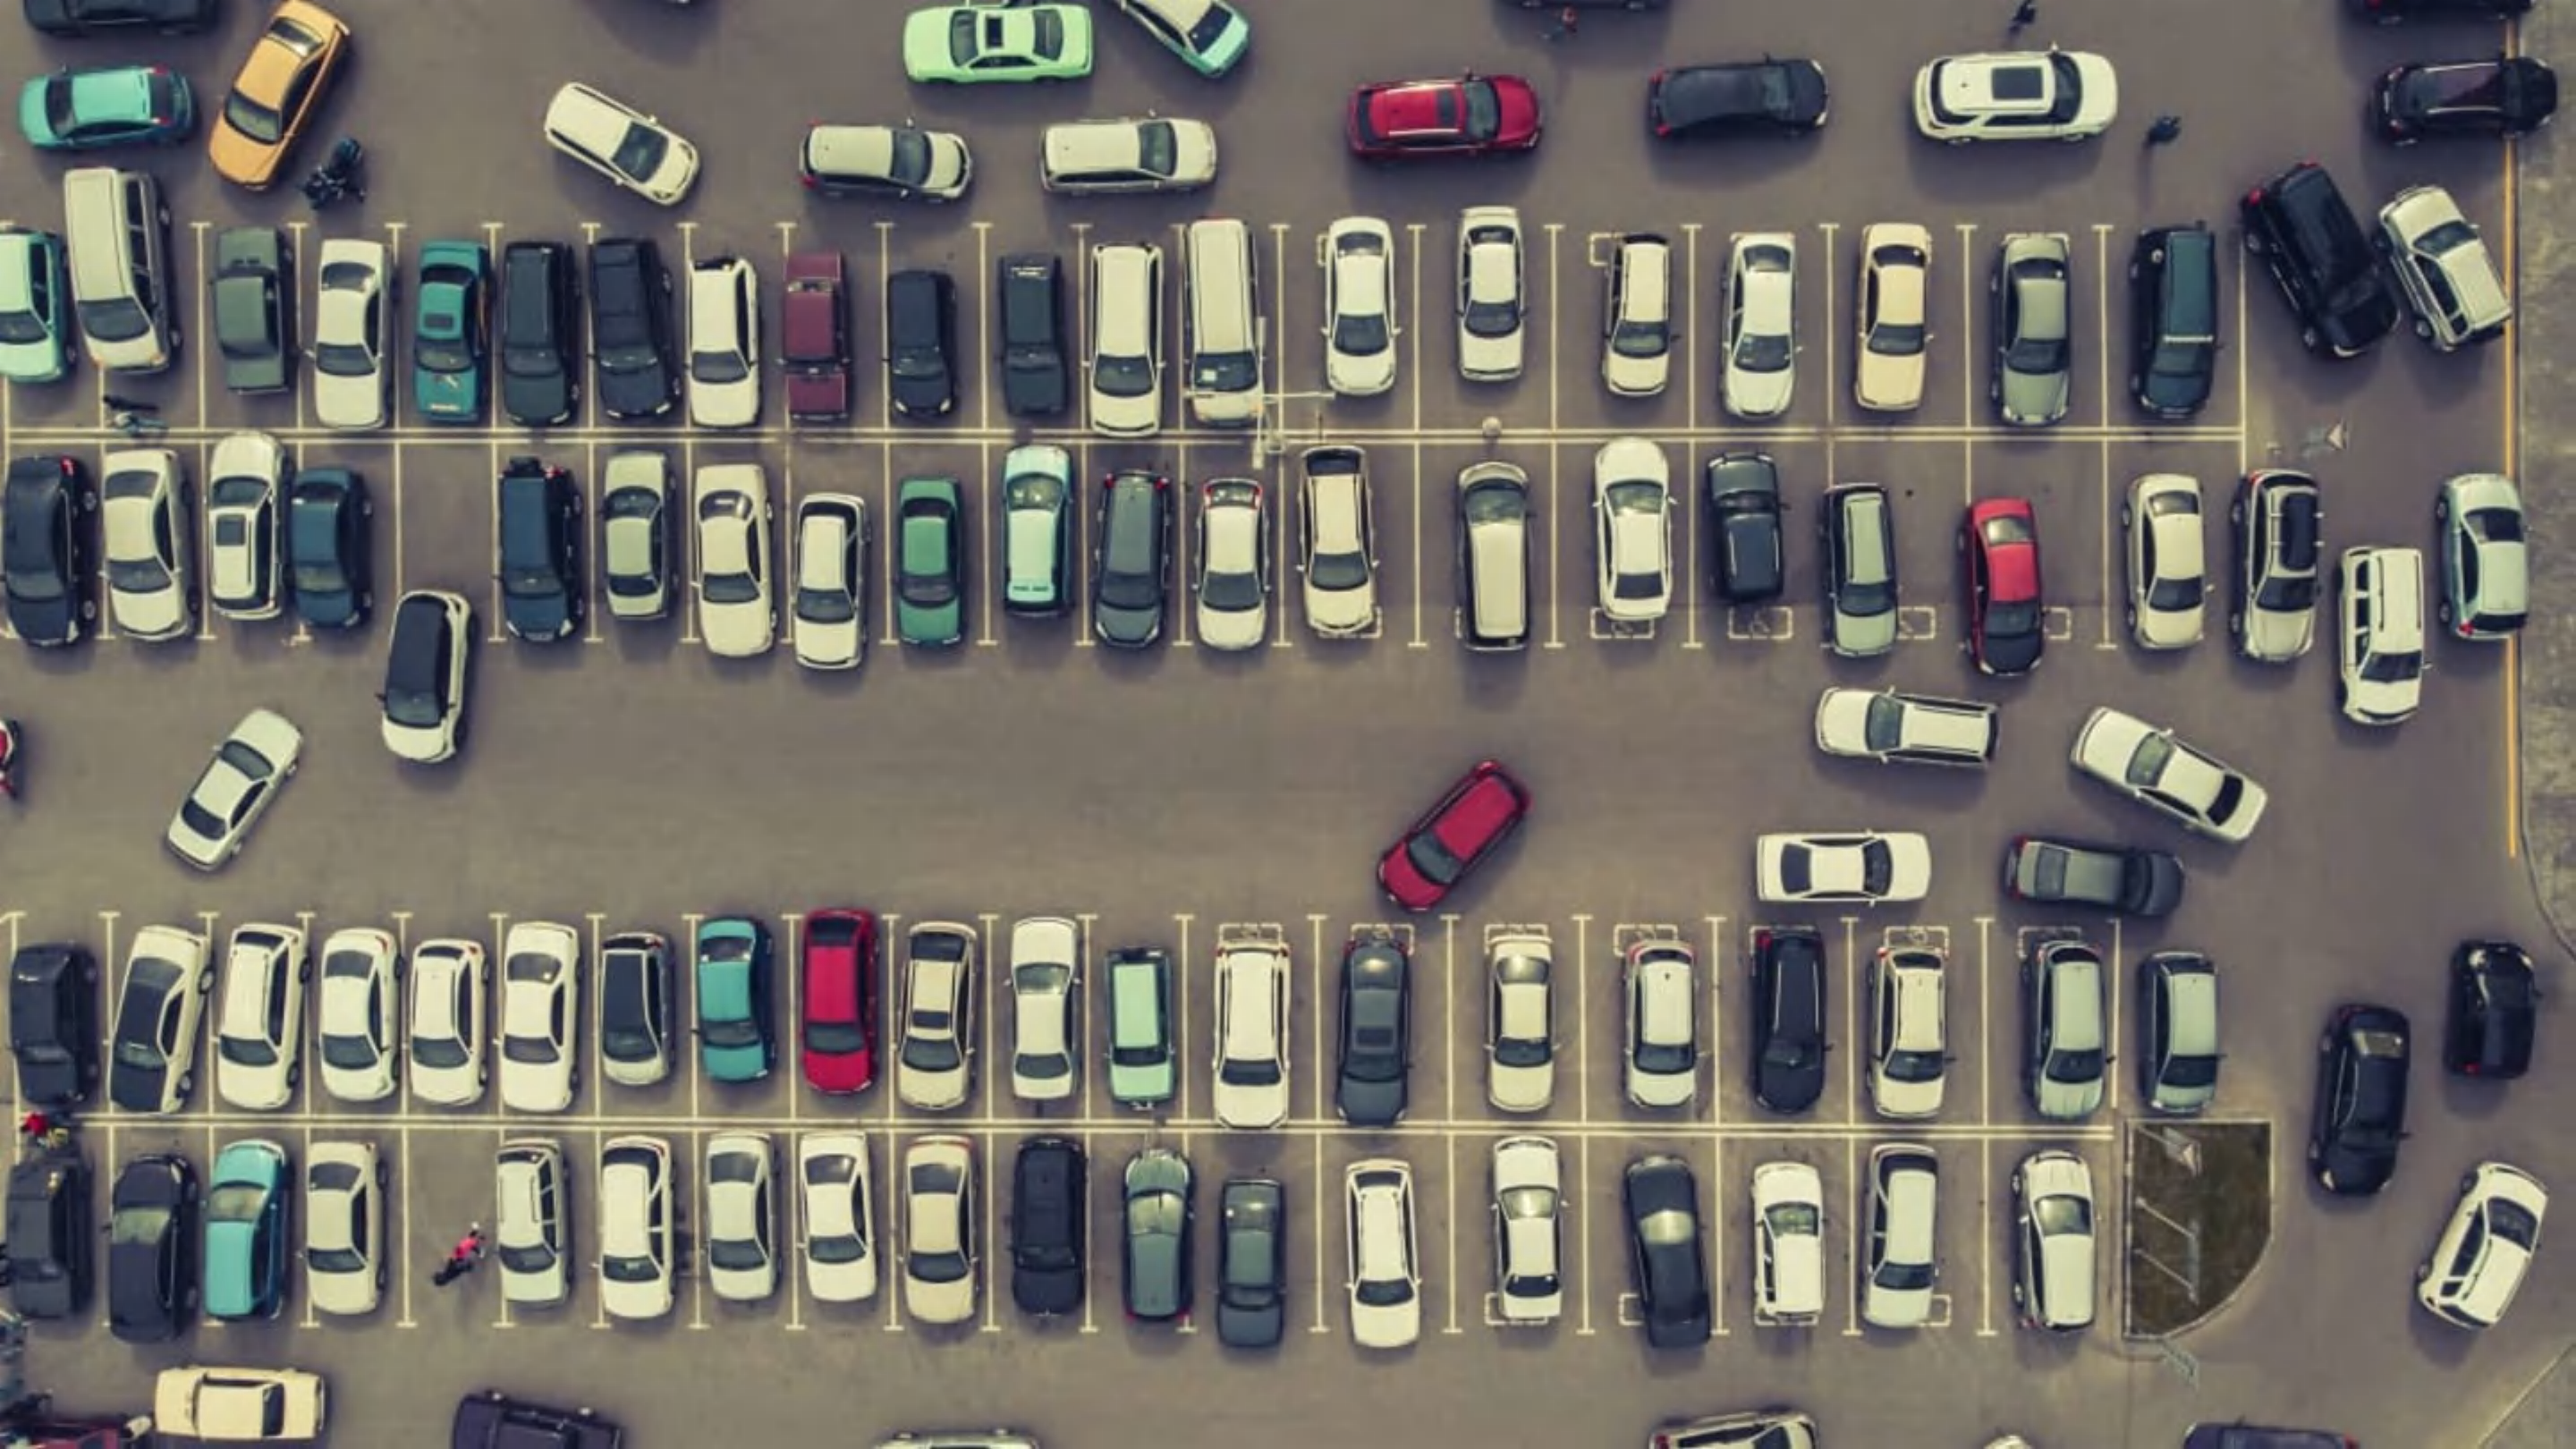 The Best Place to Park at the Mall, According to Science